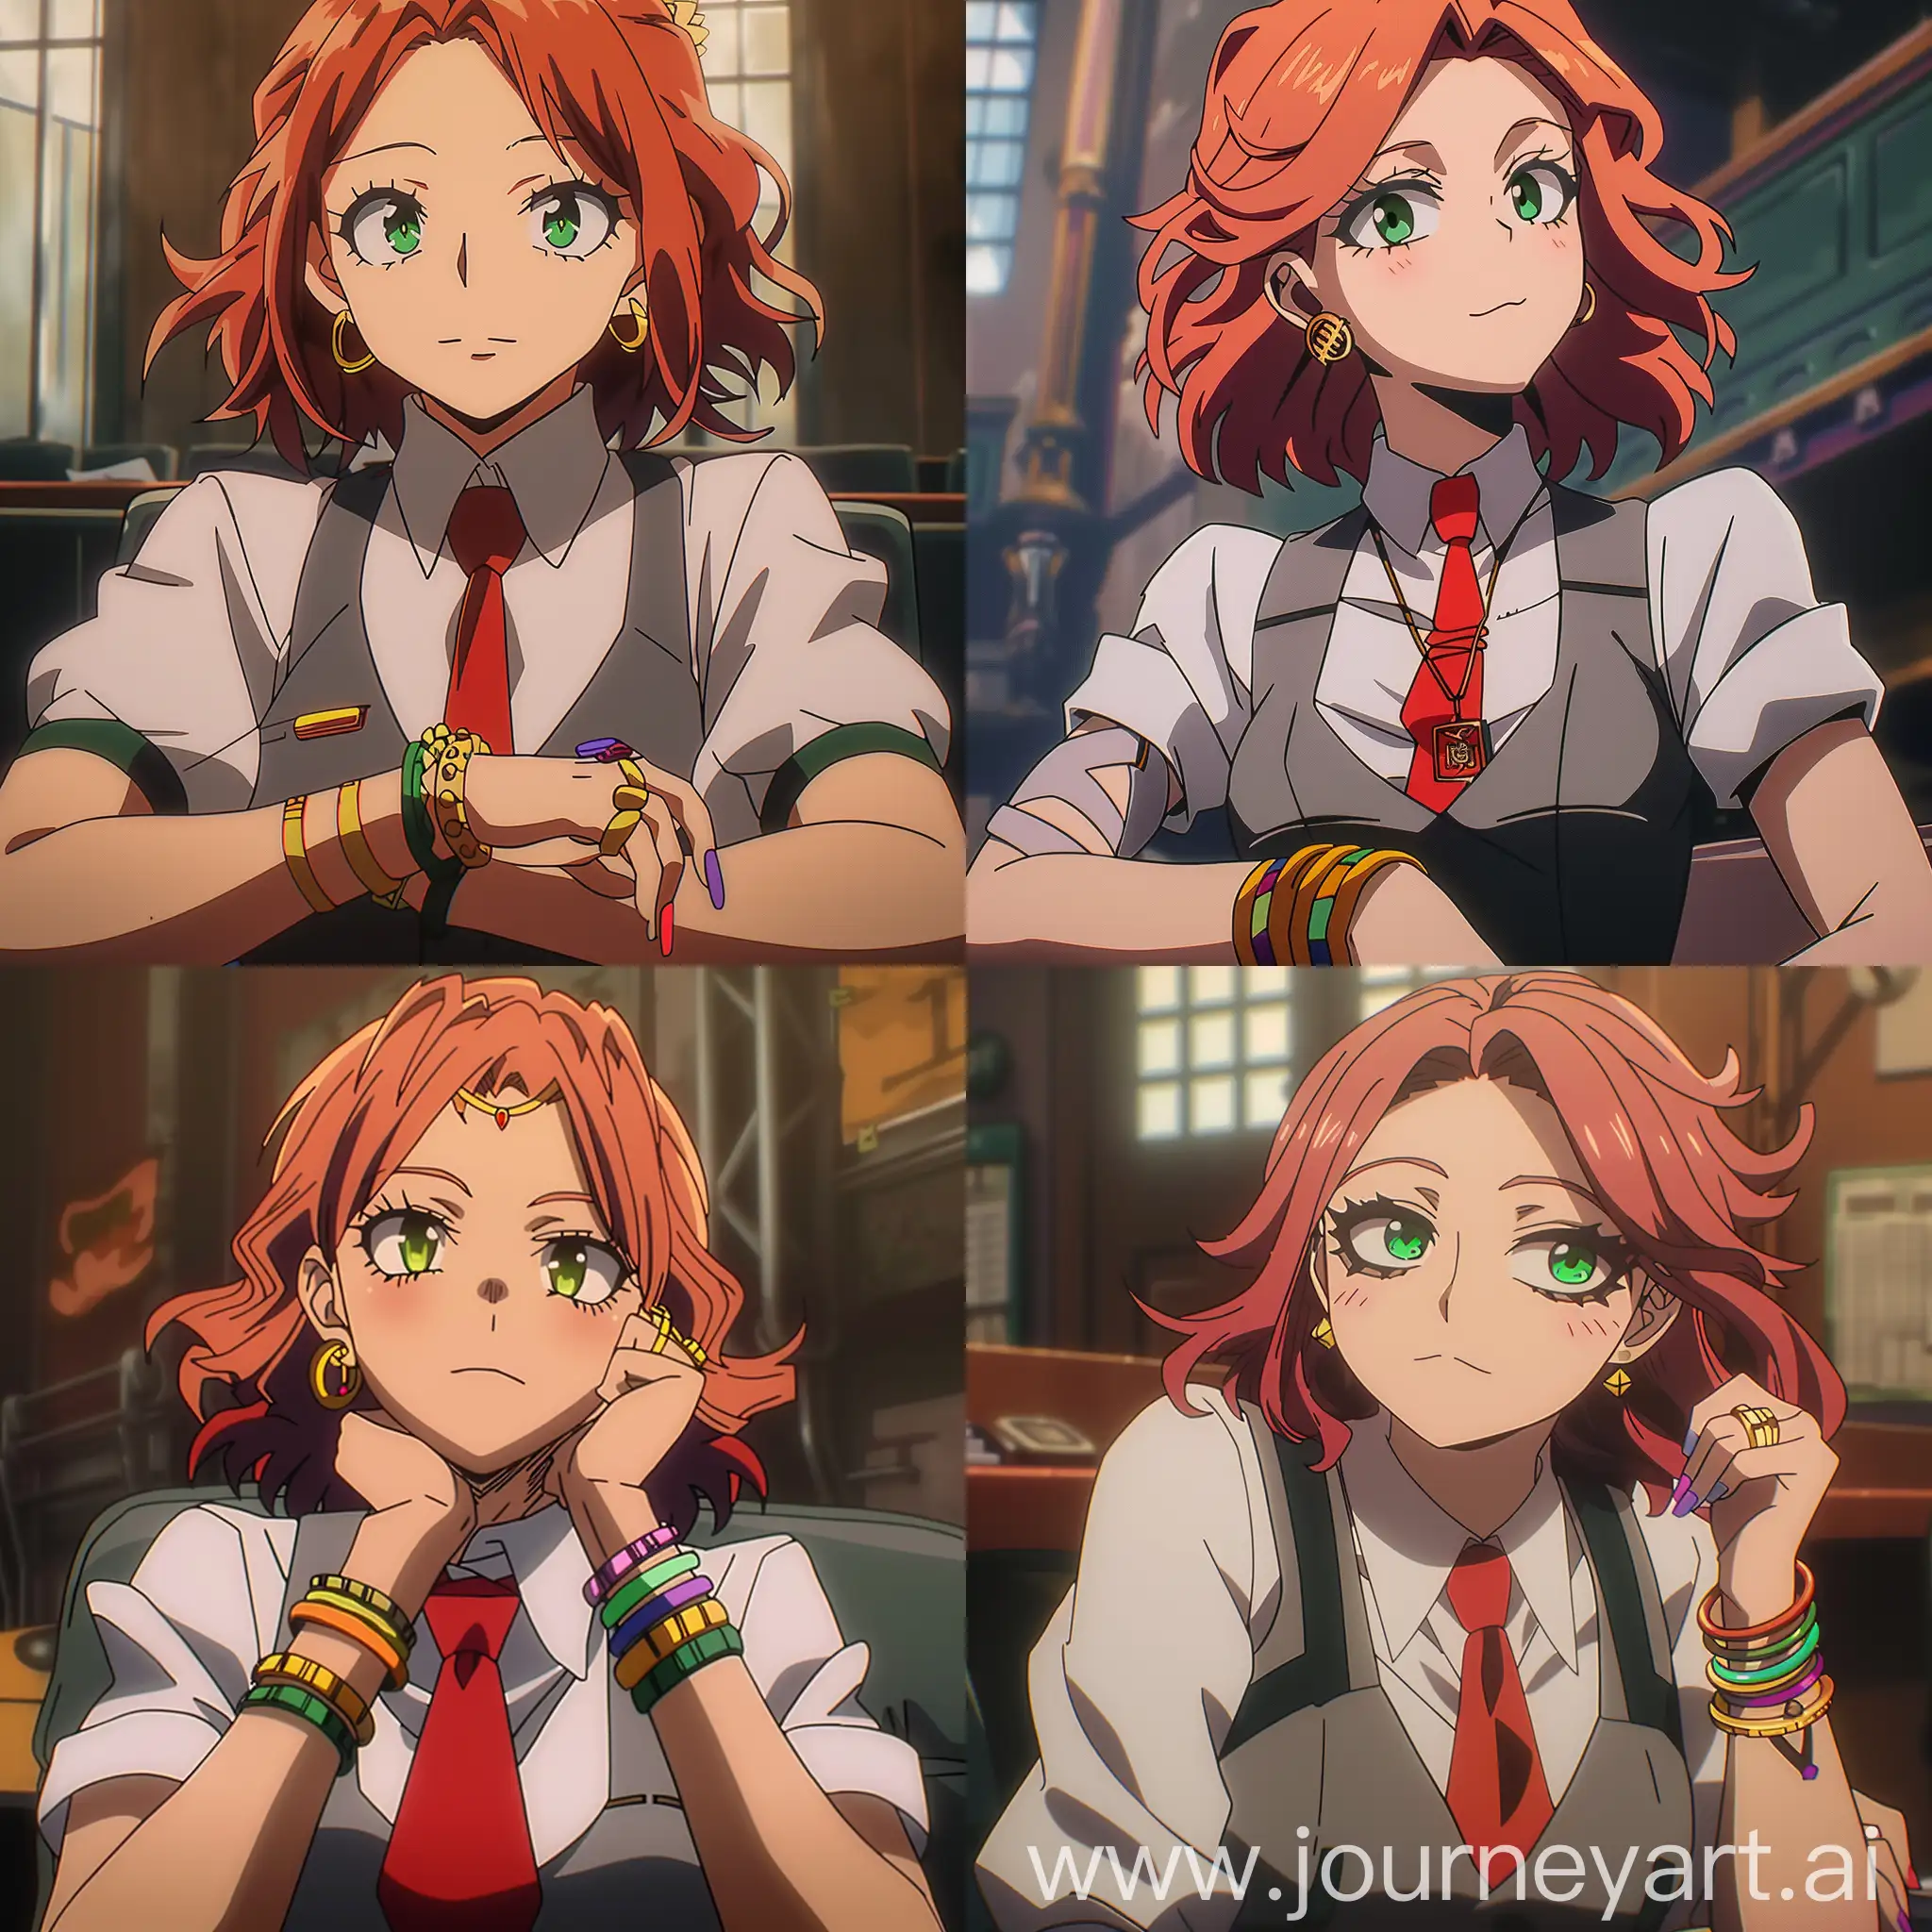 Teenage-Girl-with-Red-Hair-and-Green-Eyes-Anime-Style-Portrait-from-My-Hero-Academia